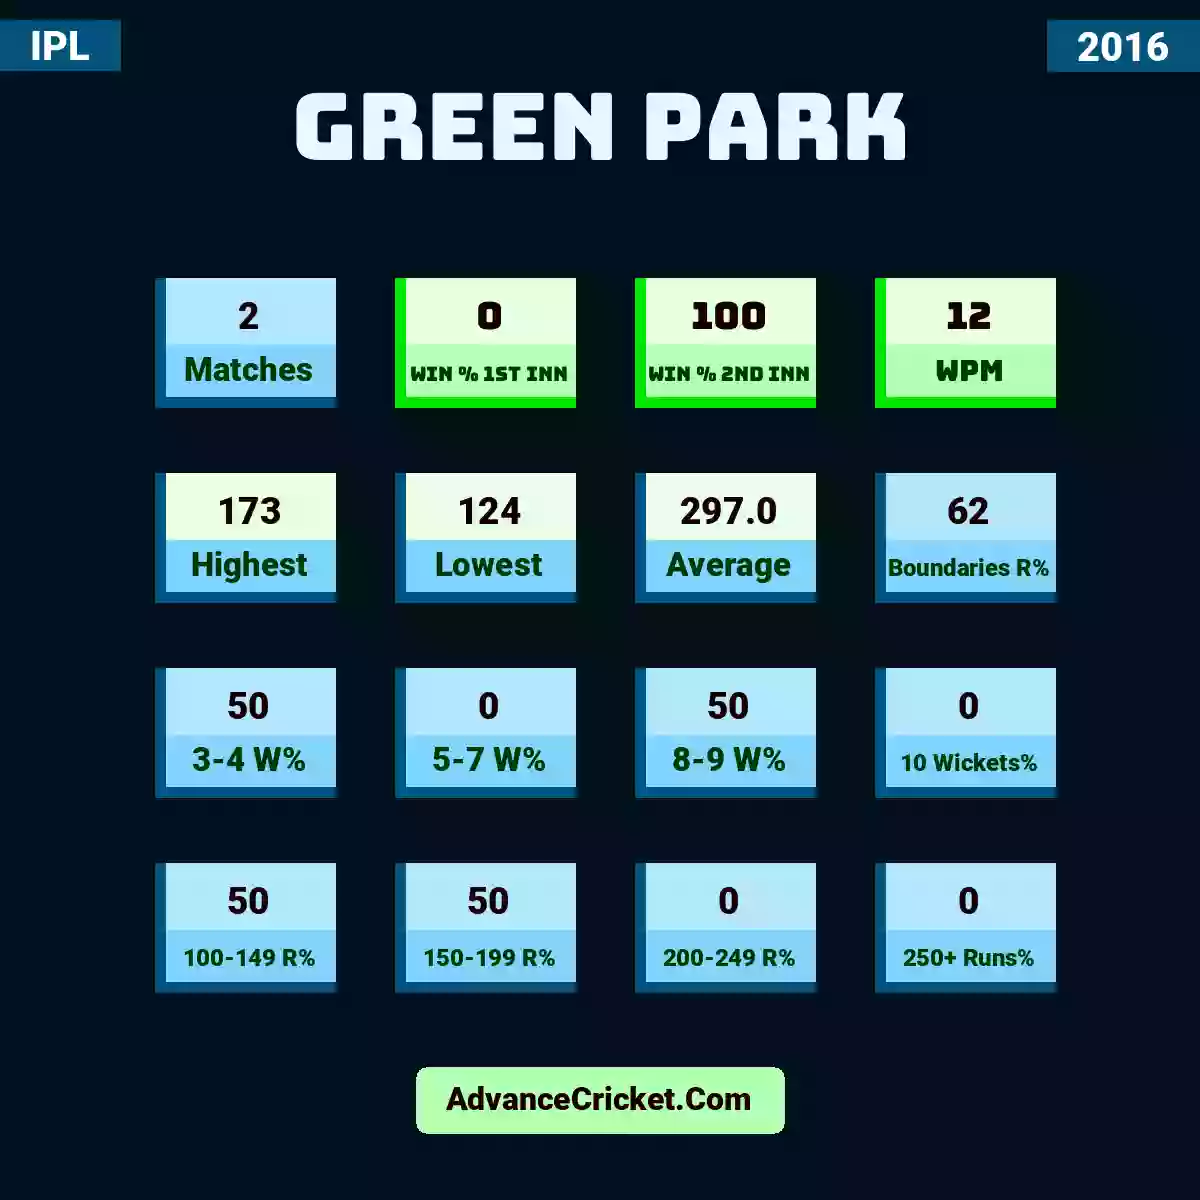 Image showing Green Park with Matches: 2, Win % 1st Inn: 0, Win % 2nd Inn: 100, WPM: 12, Highest: 173, Lowest: 124, Average: 297.0, Boundaries R%: 62, 3-4 W%: 50, 5-7 W%: 0, 8-9 W%: 50, 10 Wickets%: 0, 100-149 R%: 50, 150-199 R%: 50, 200-249 R%: 0, 250+ Runs%: 0.